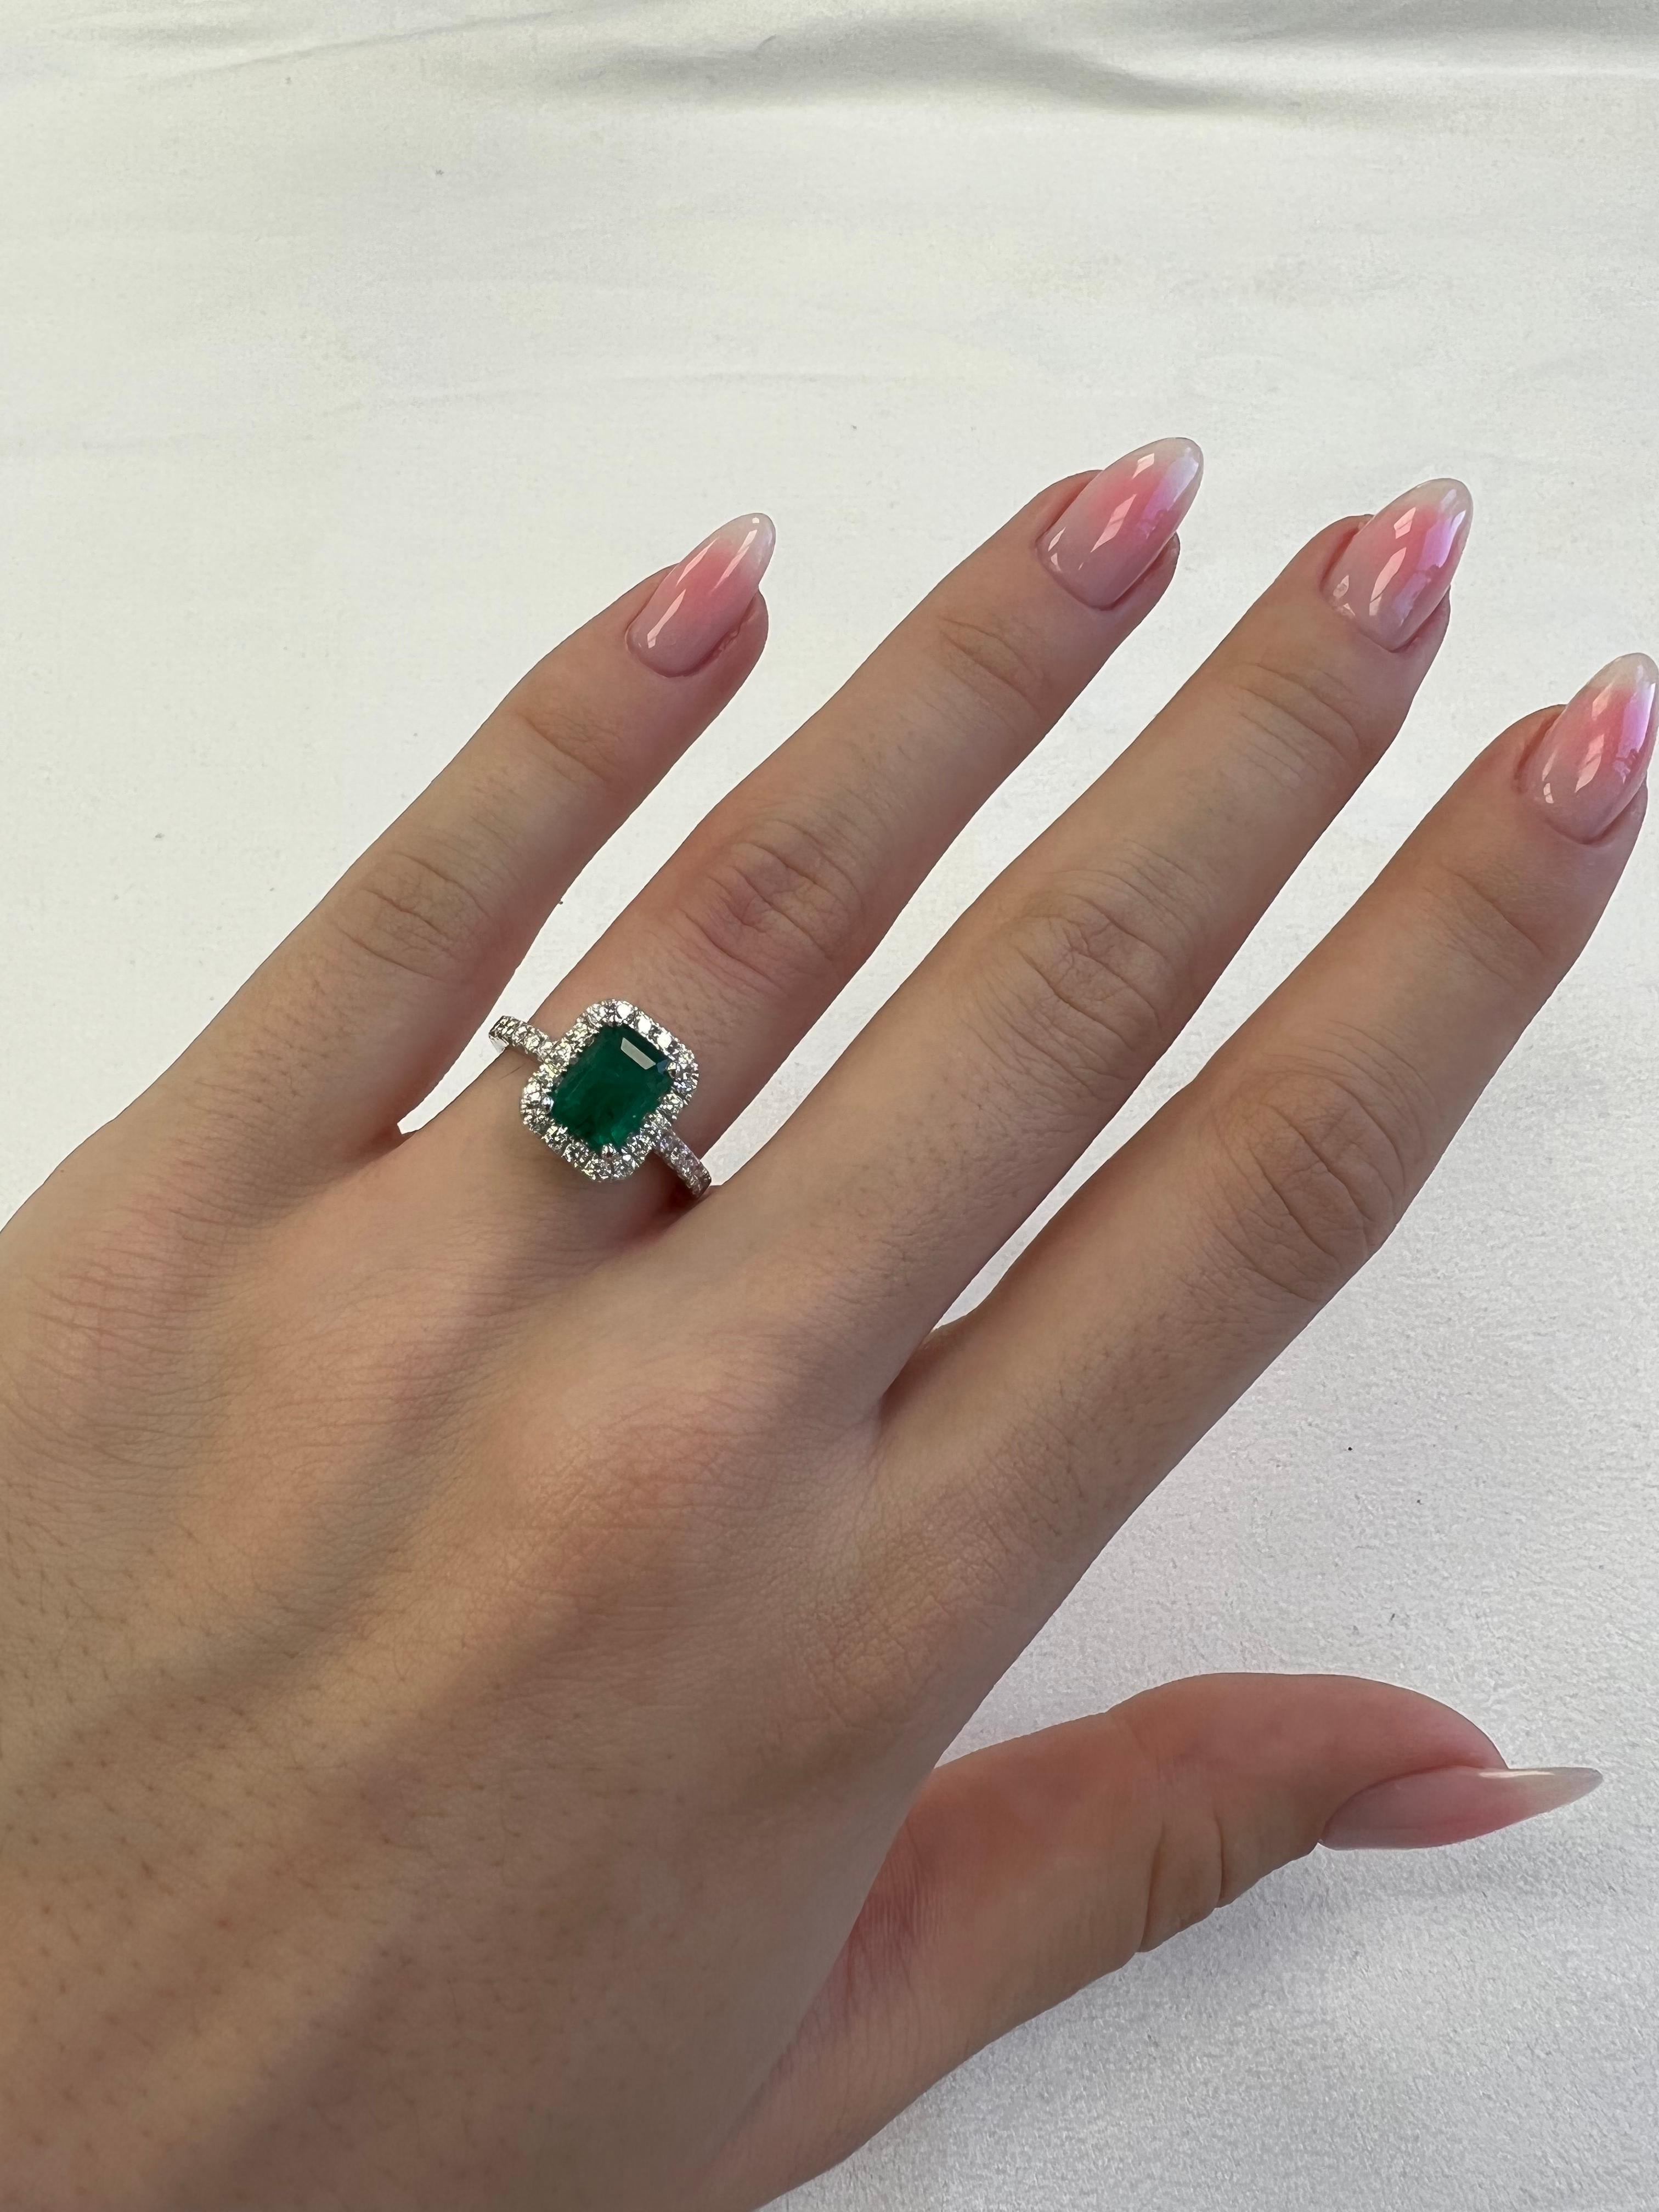 Classic emerald and diamond halo ring, GIA certified. 
2.52 carats total gemstone weight.
1.95 carat emerald cut emerald, F2, GIA certified. Complimented by 40 round brilliant diamonds, 0.57 carats, F/G color and VS clarity. 18k white gold, 4.65